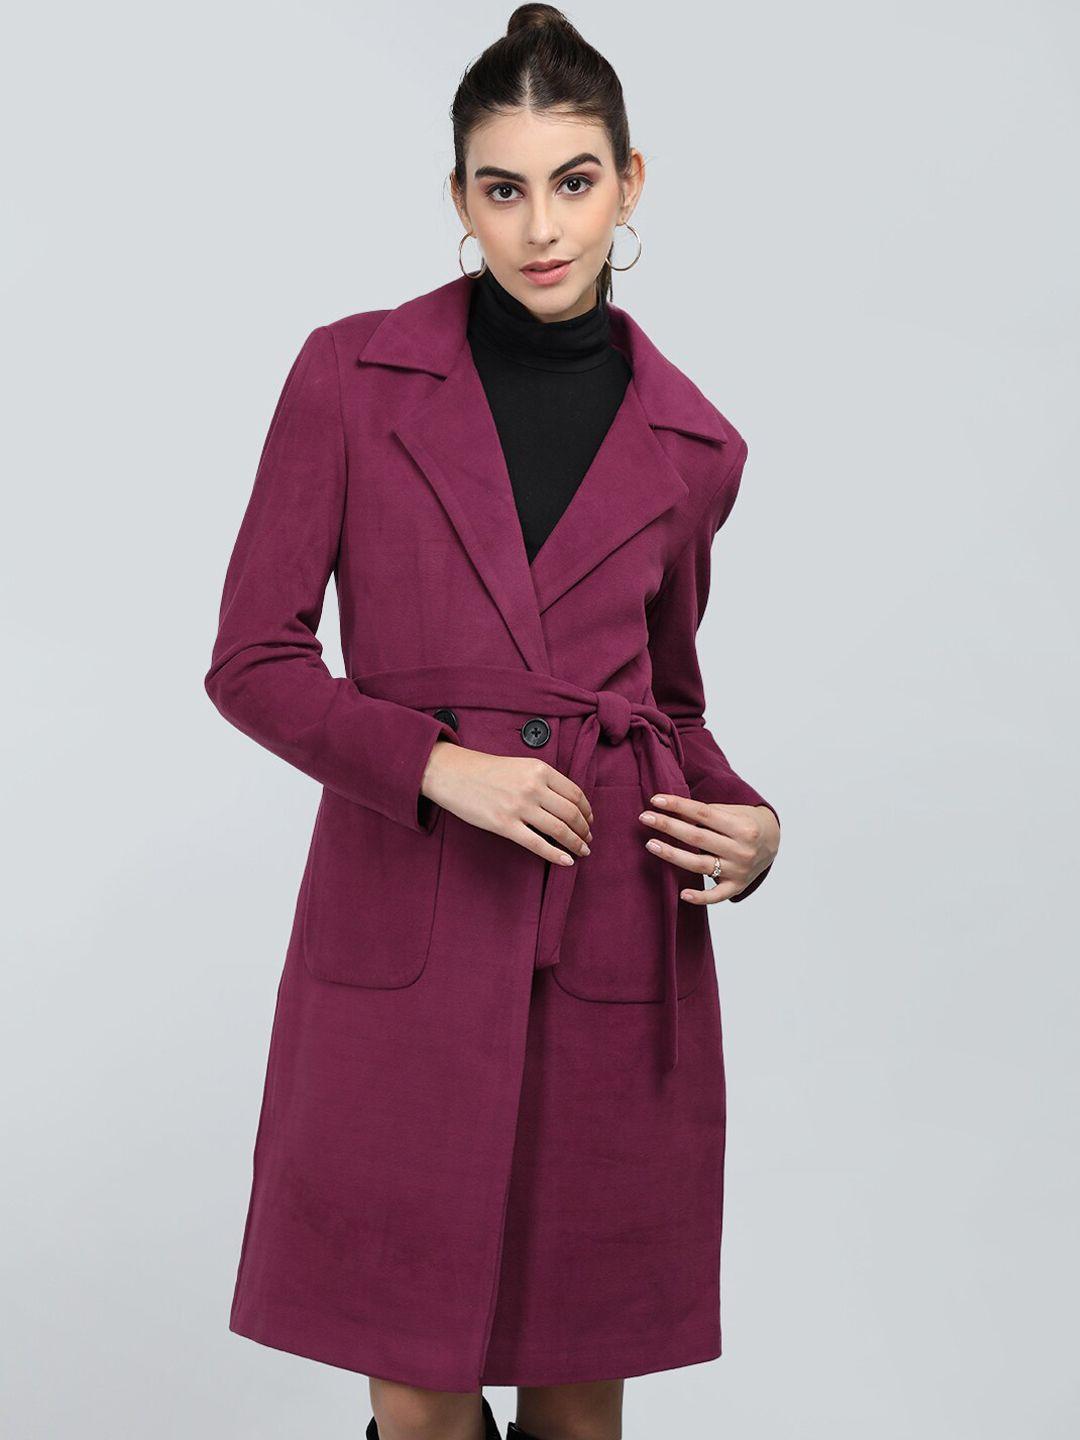 chkokko double breasted woollen trench coats